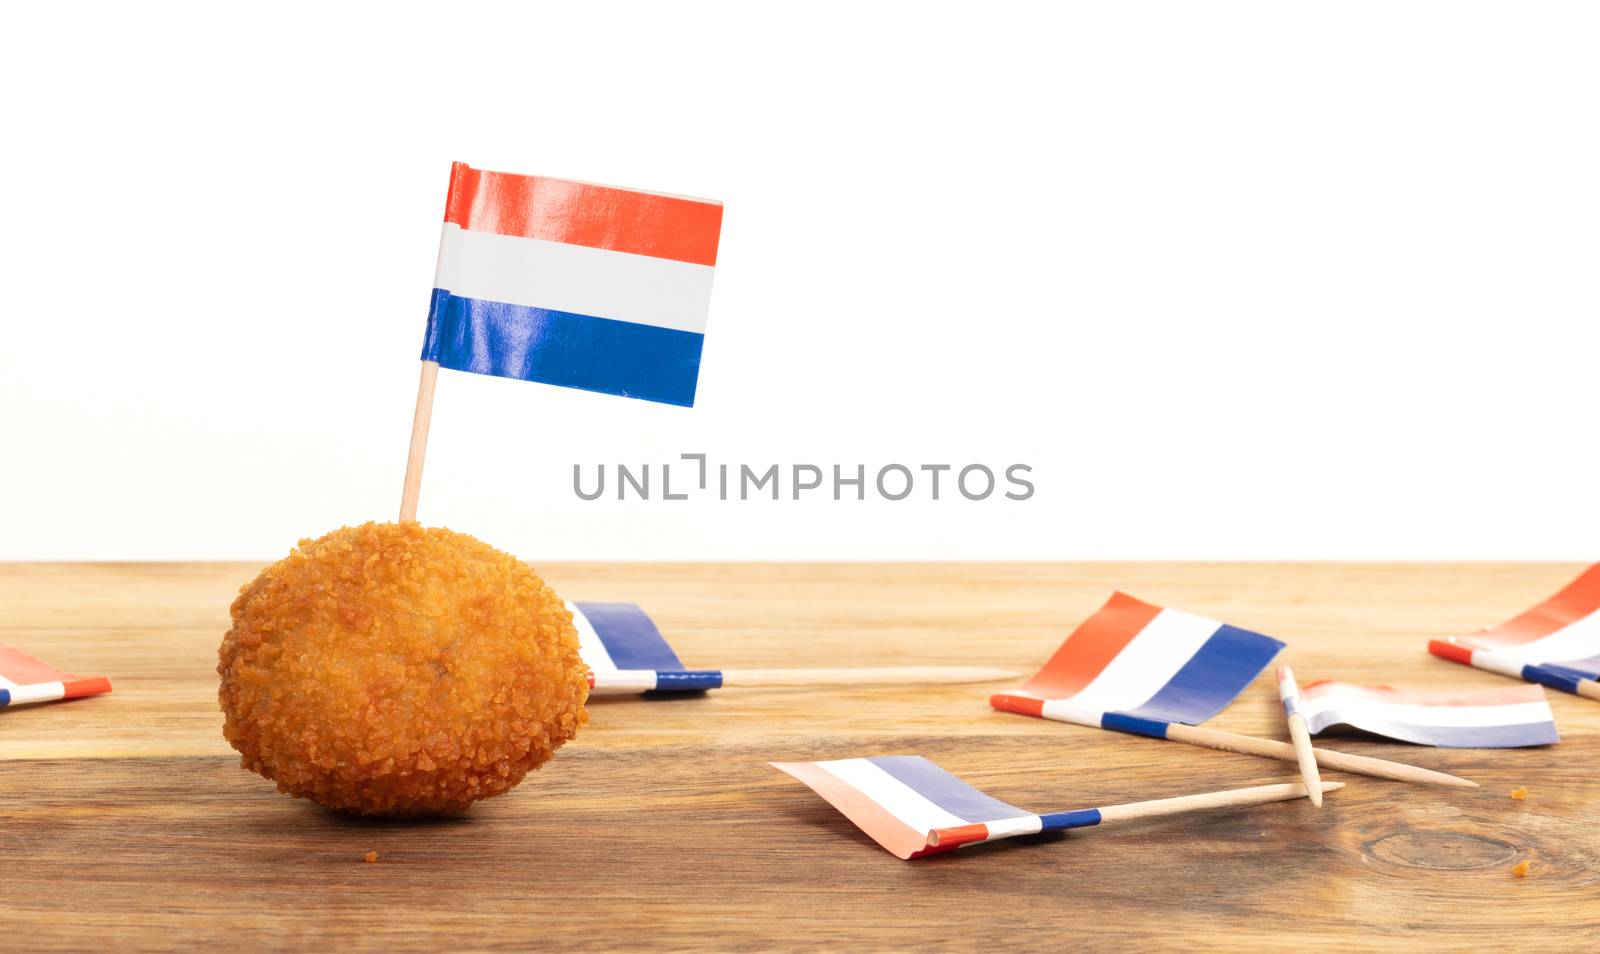 Dutch traditional snack bitterbal, just one left on a wooden serving board, isolated